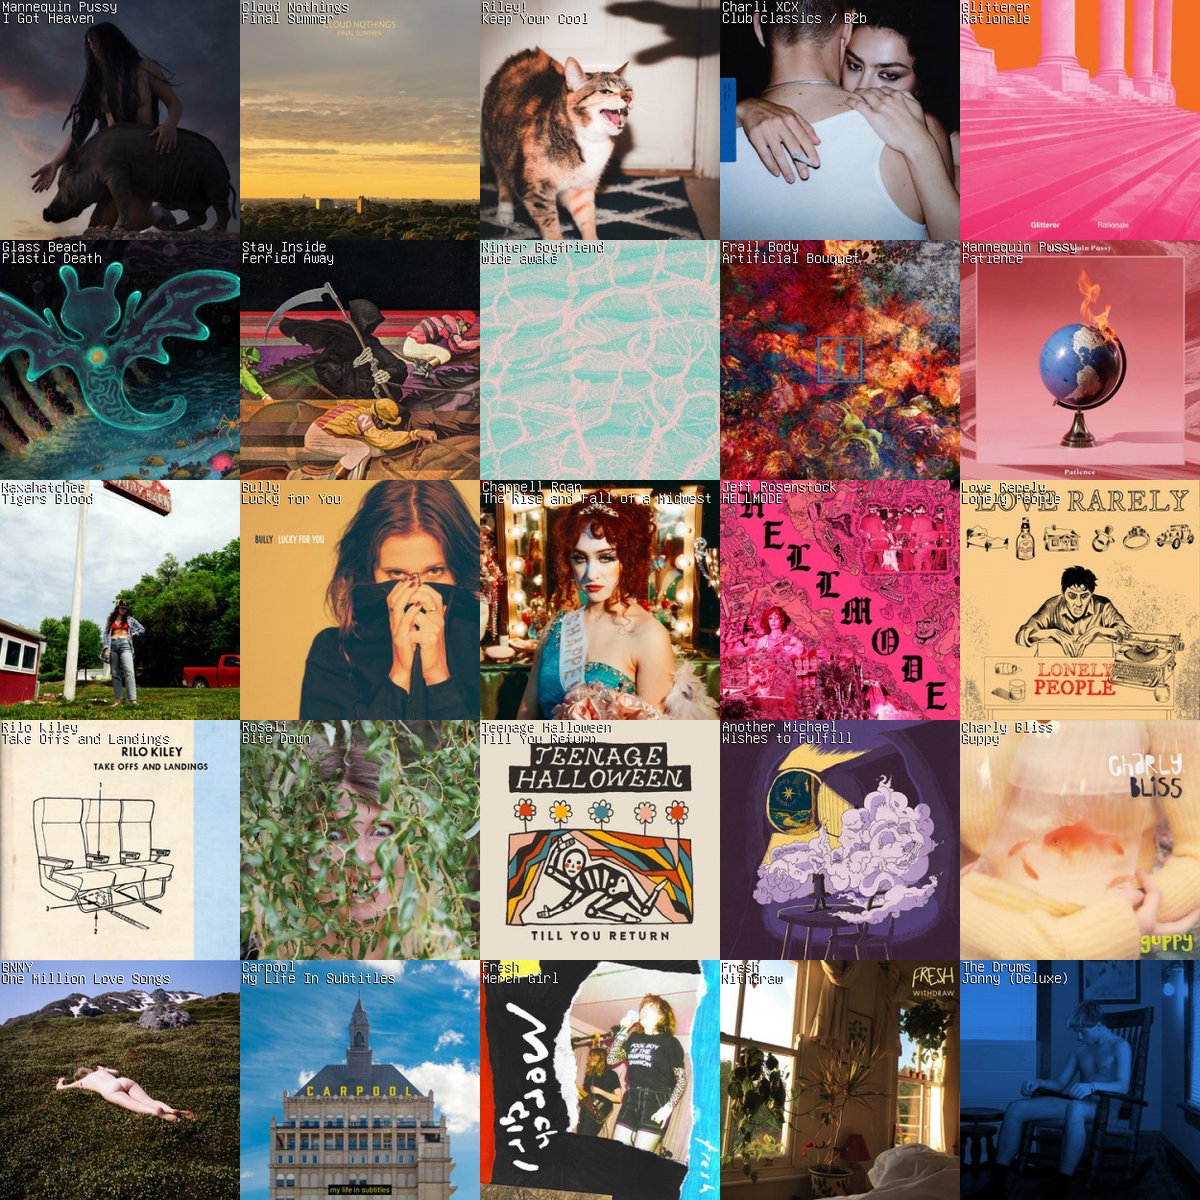 april 24. Do you have an embarrassing album on your 5x5? if so i can send you a little square of one of our releases to cover it and pretend you listened to our 3 track single 20+ times like i actually did